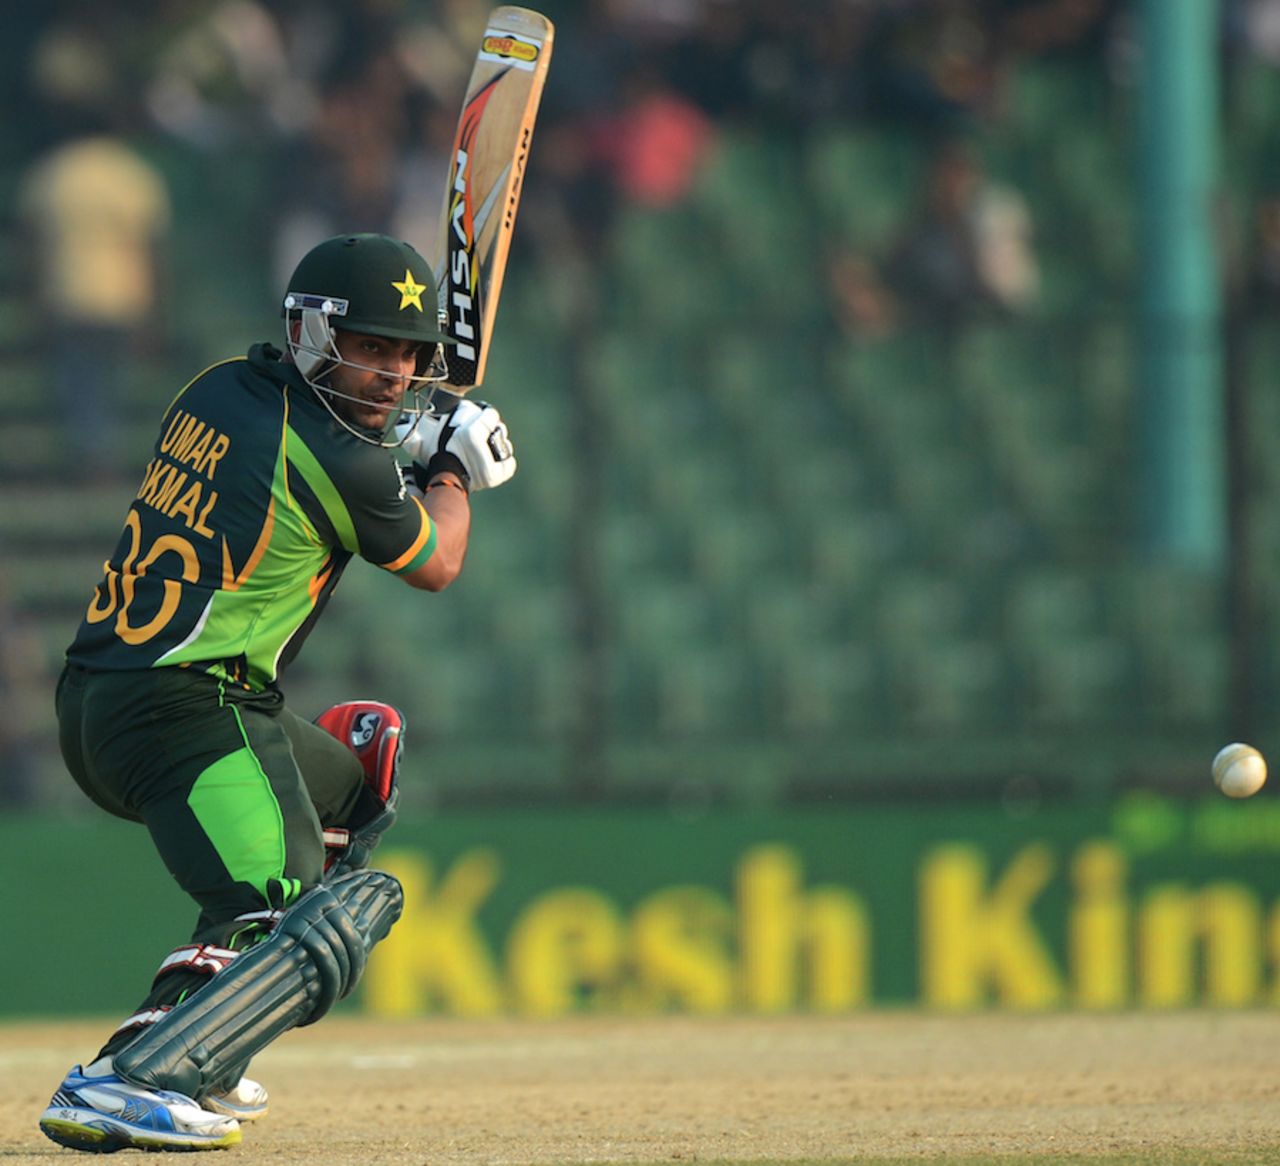 Umar Akmal guided Pakistan's innings after the middle-order collapse, Afghanistan v Pakistan, Asia Cup 2014, Fatullah, February 27, 2014